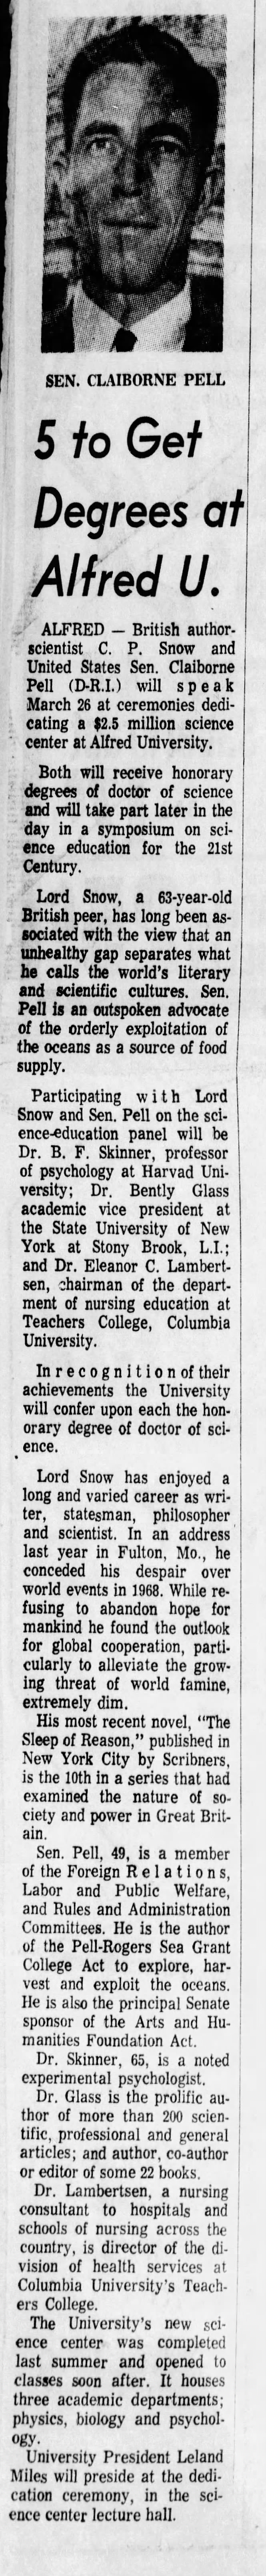 Claiborne Pell article with picture Democrat and Chronicle March 10, 1969